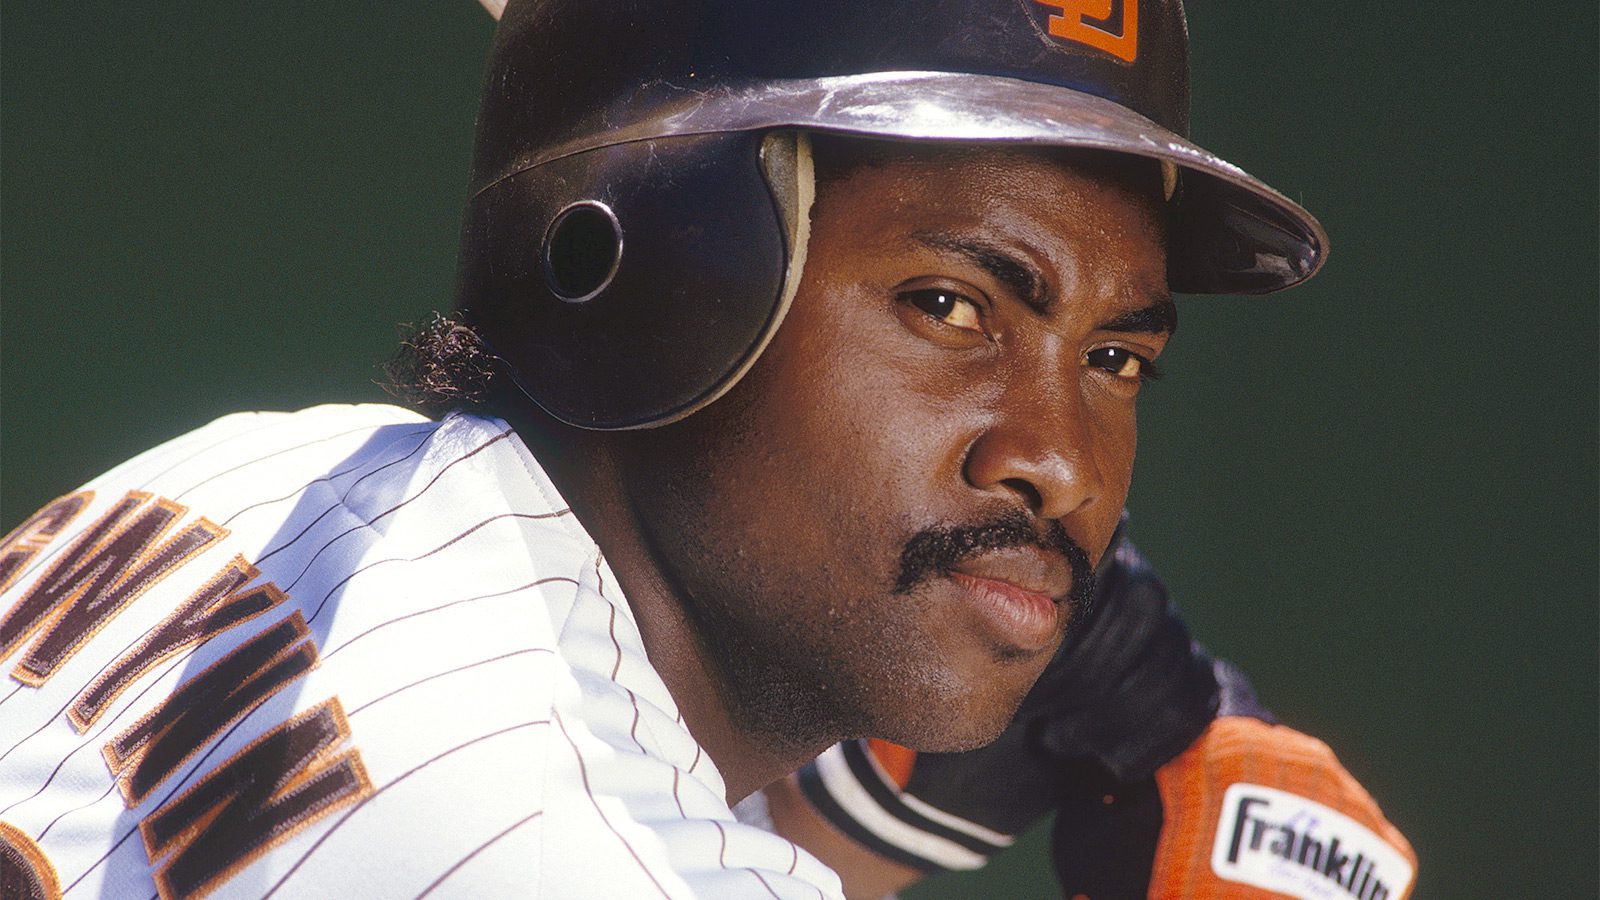 Remembering Tony Gwynn and the impact he made on Yankees fans in